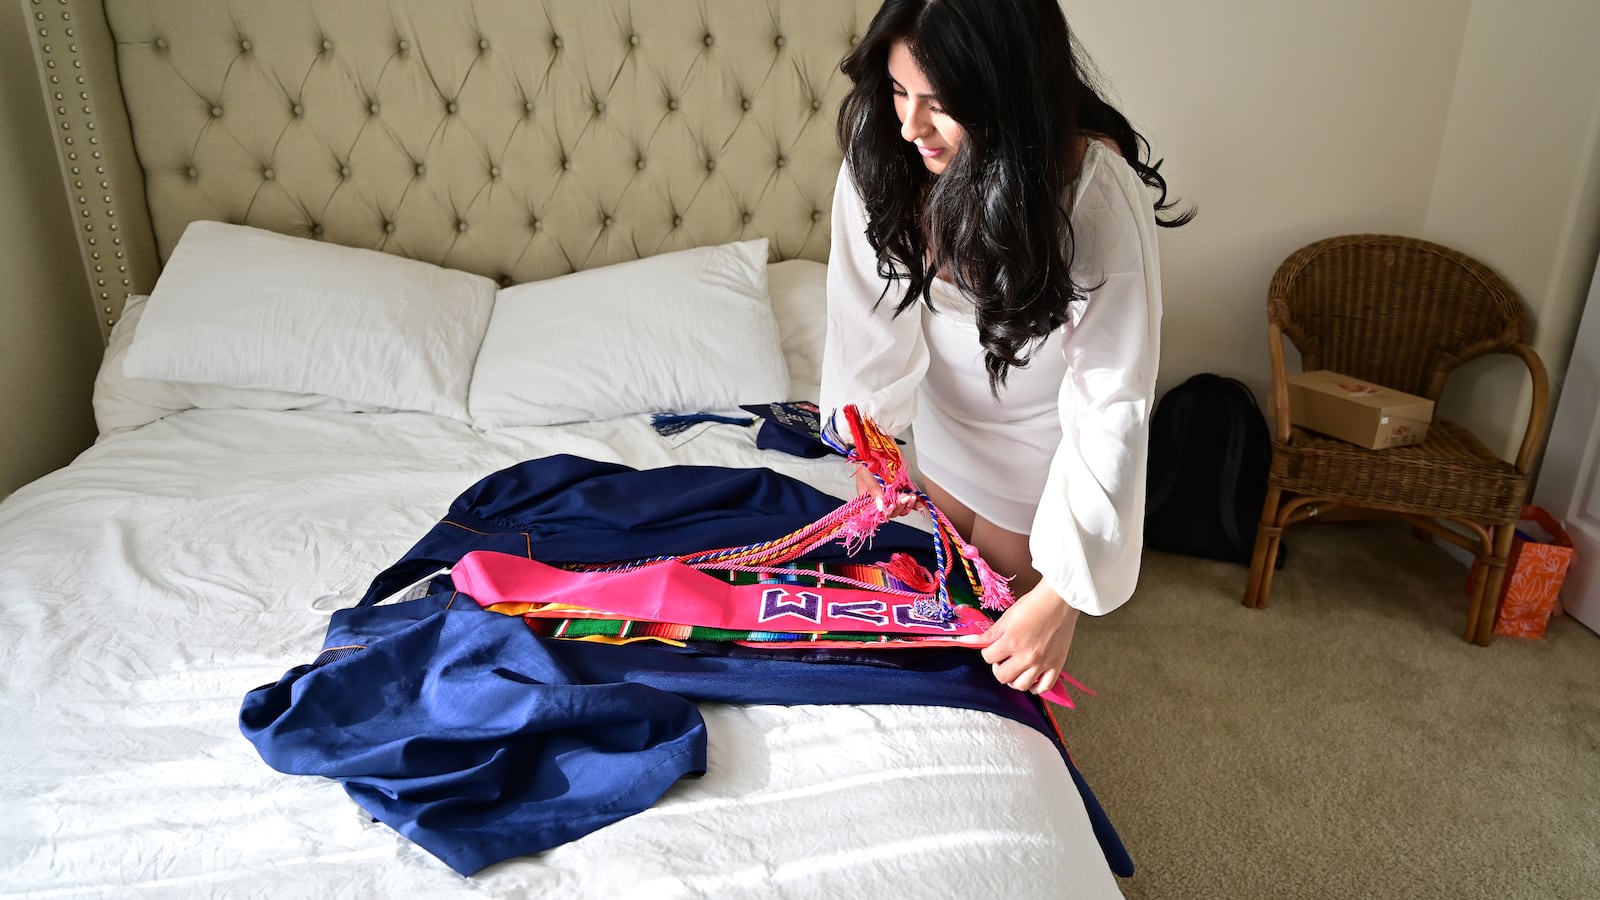 A young woman prepares her blue graduation gown for a ceremony. She has long dark hair, and places sashes over the gown on her bed.